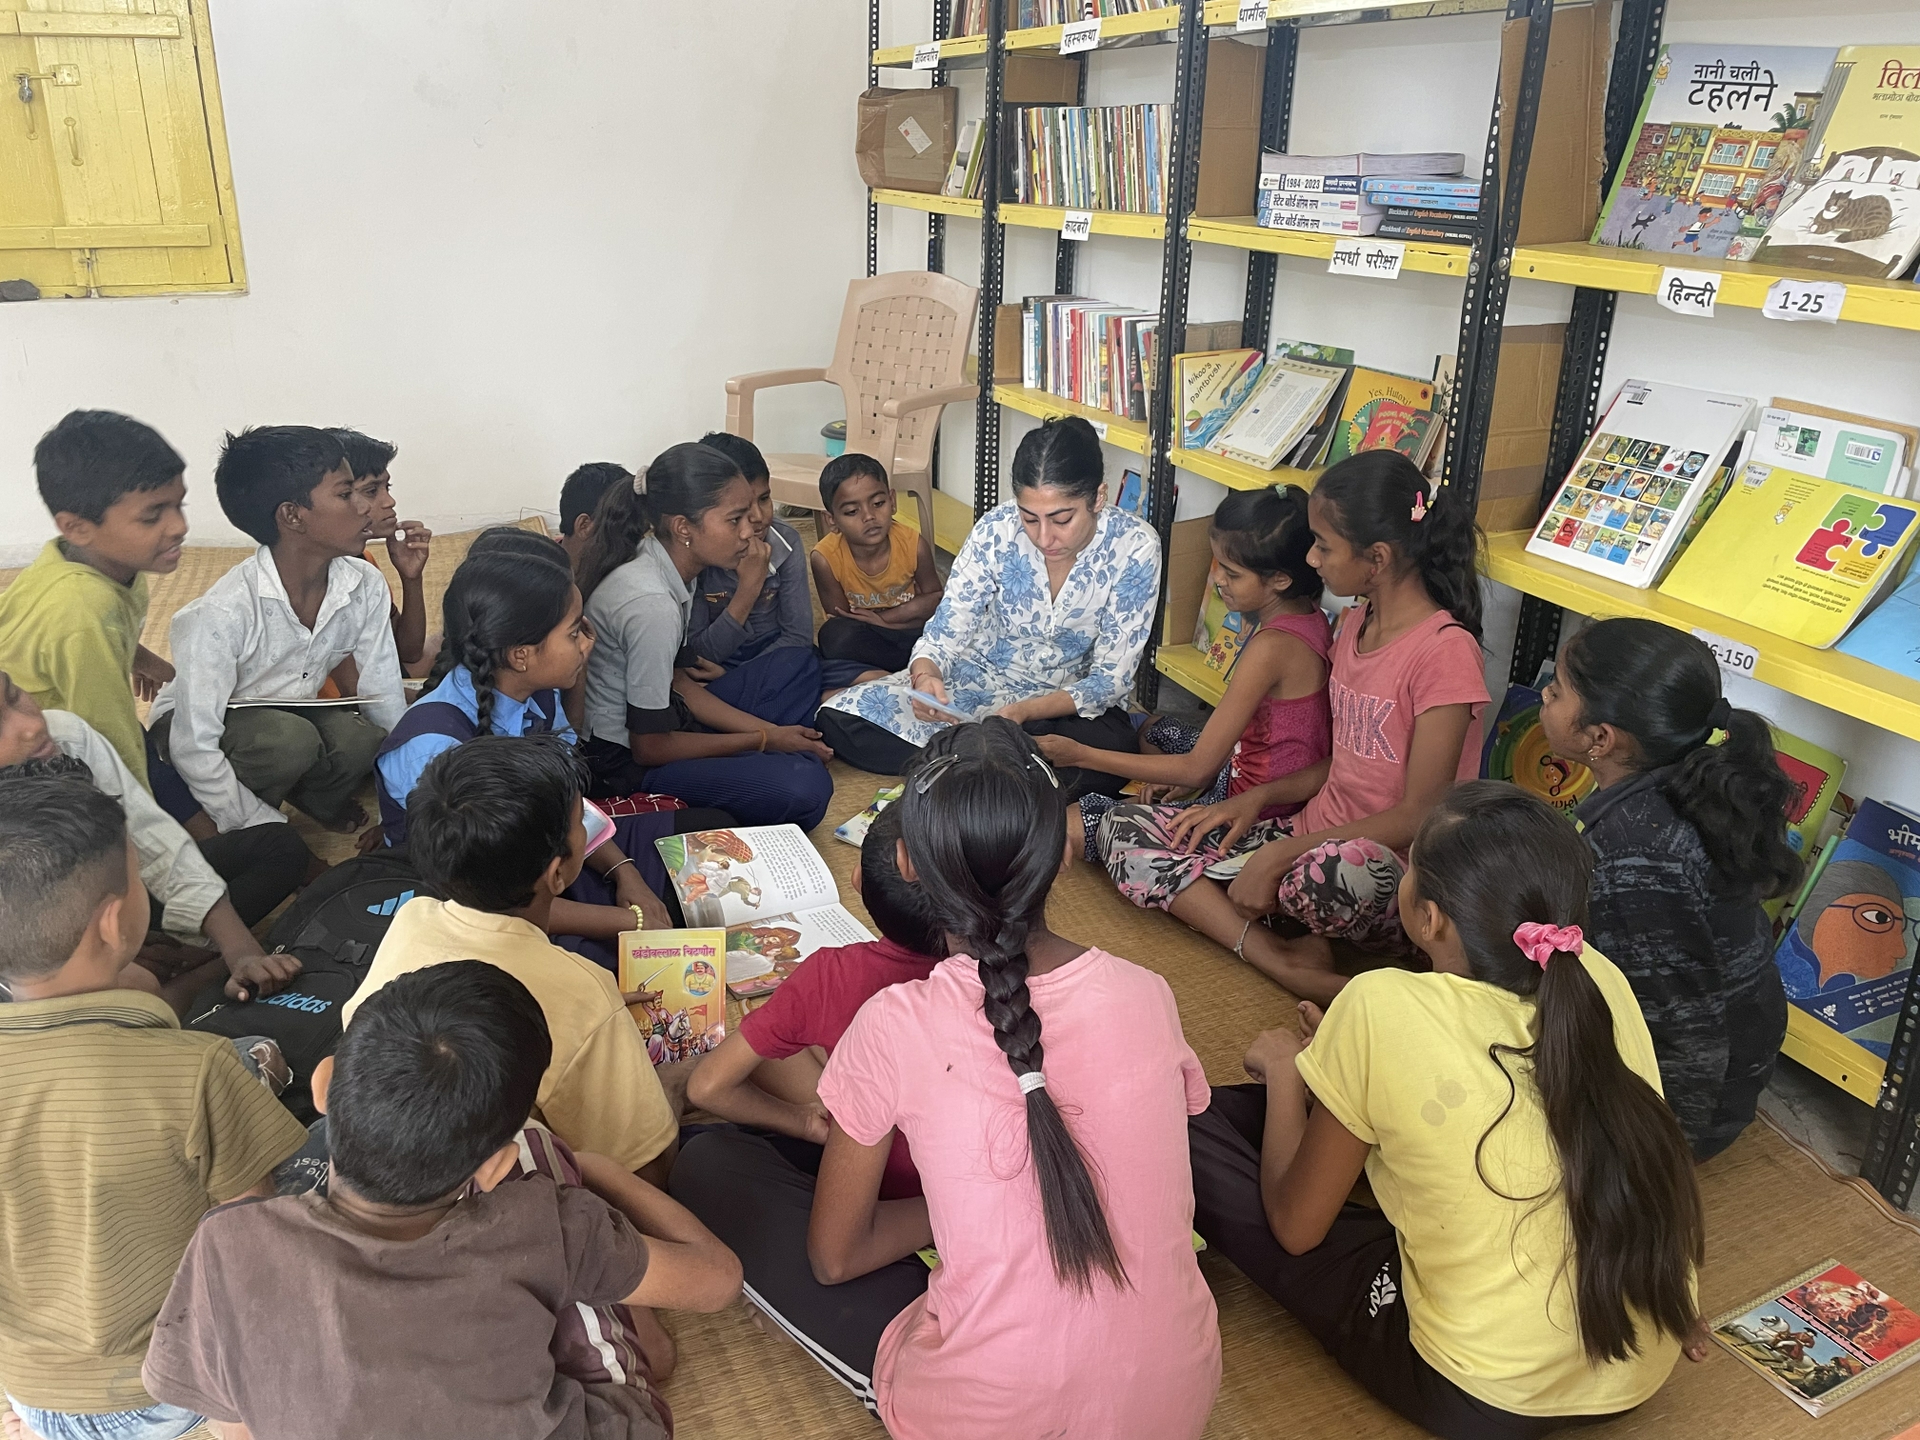 Aarti Sethi is surrounded by about a dozen kids, sitting around her crosslegged and listening to her read. They're gathered in front of a library bookshelf.